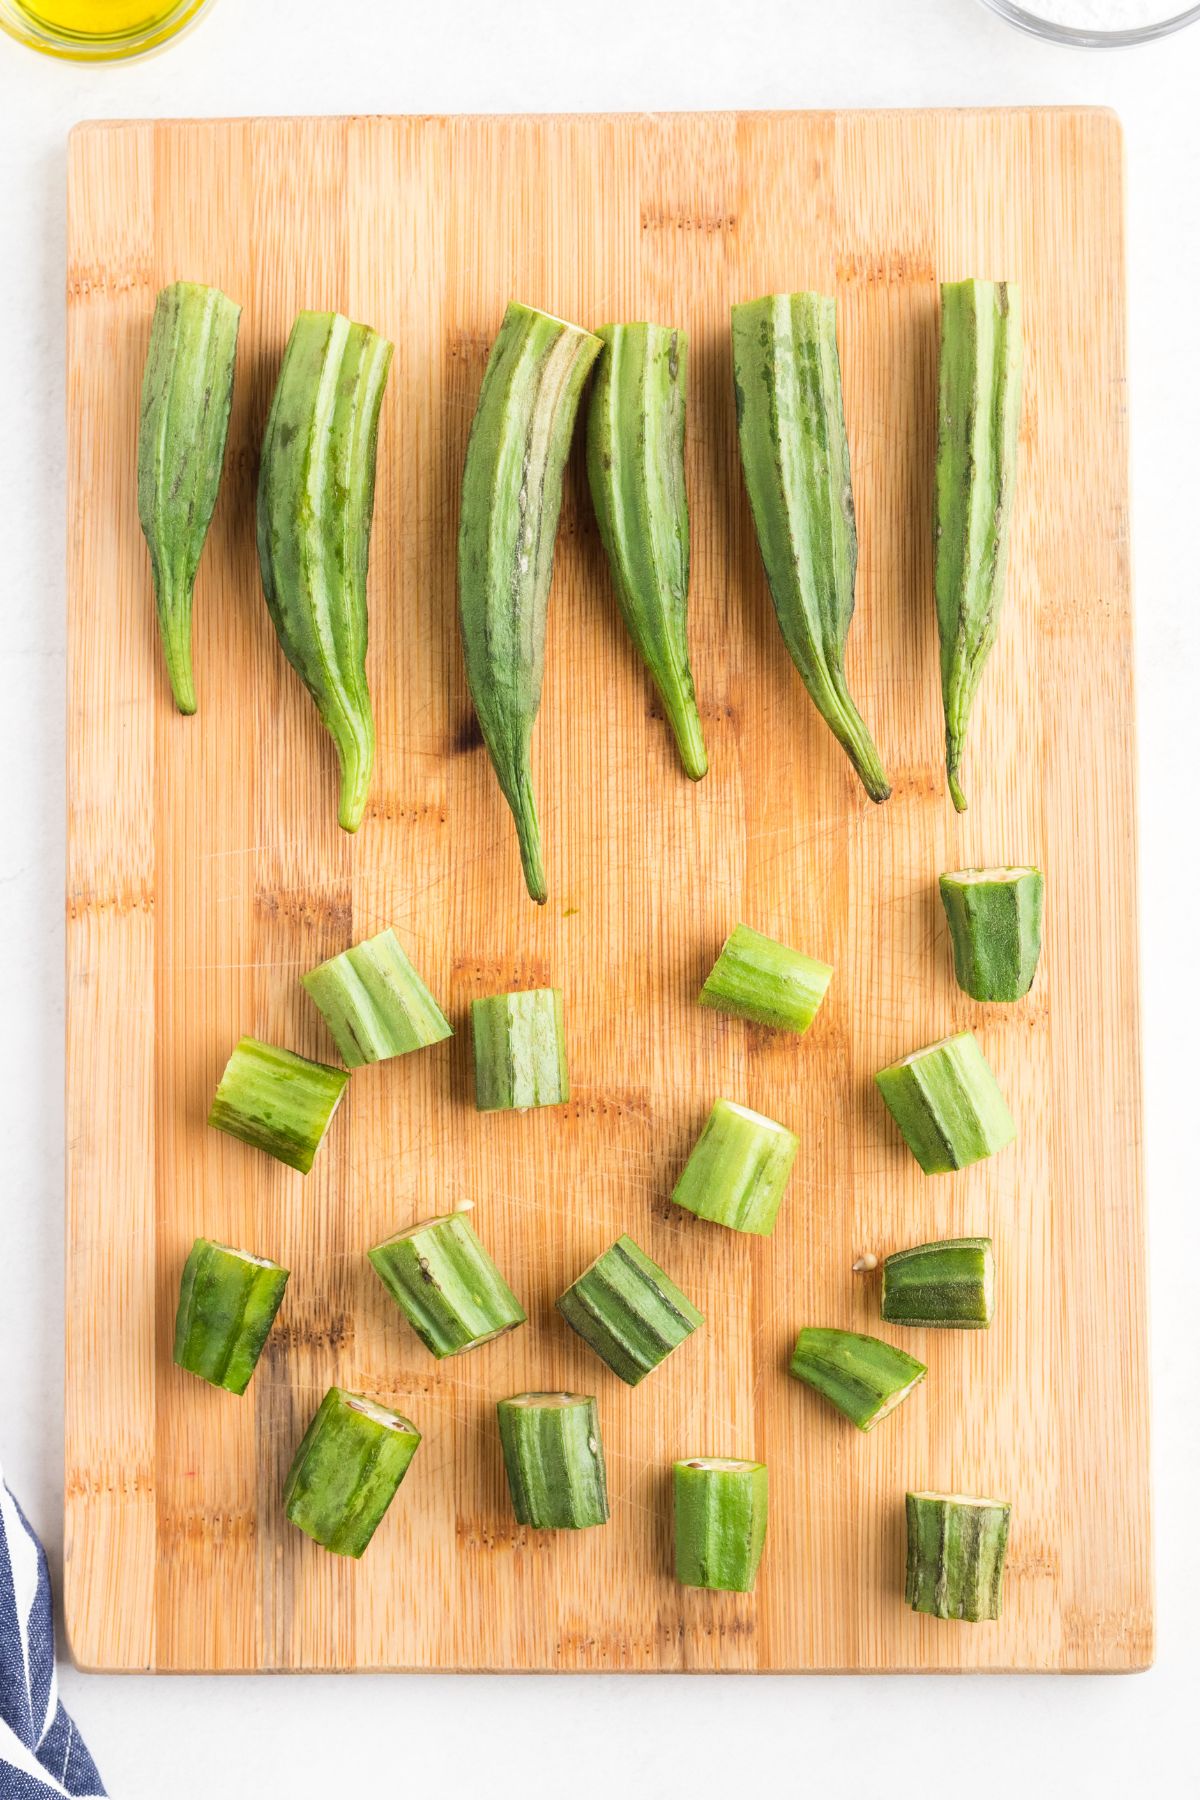 Fresh uncooked okra on a wooden cutting board with stems cut and removed.